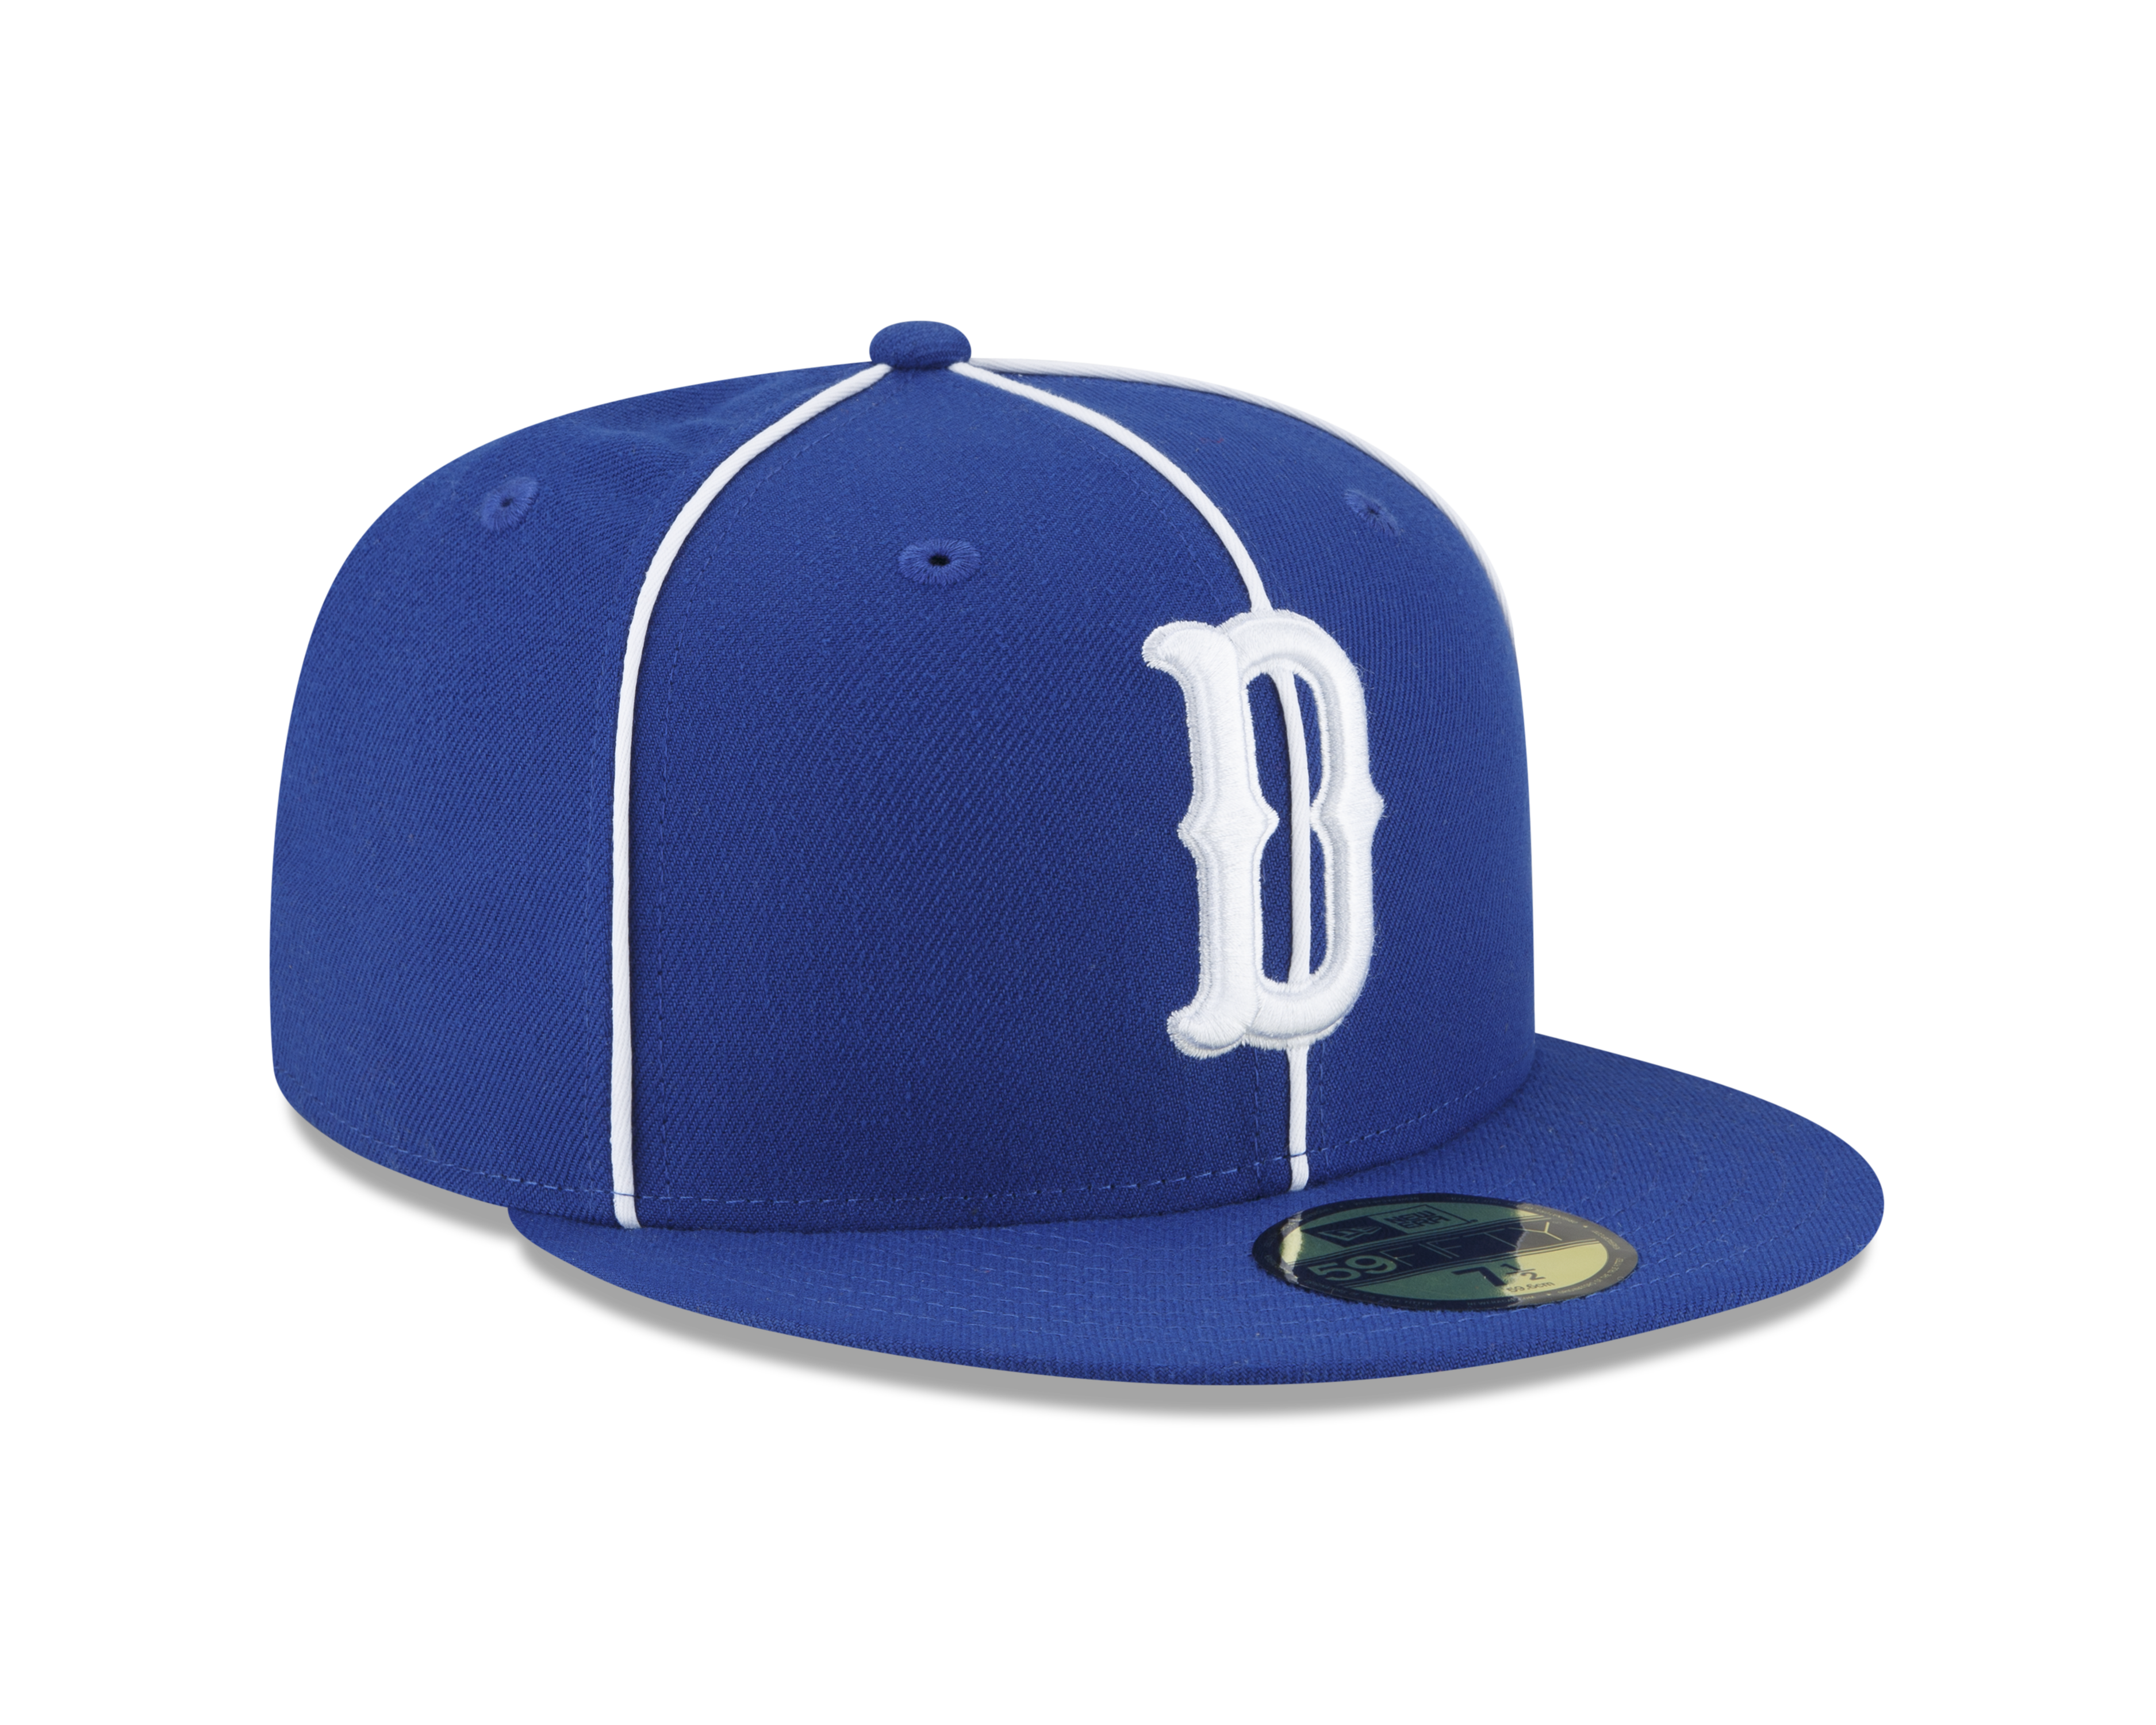 New Era Men's Blue Oklahoma City Dodgers Authentic Collection Alternate  Logo 59FIFTY Fitted Hat